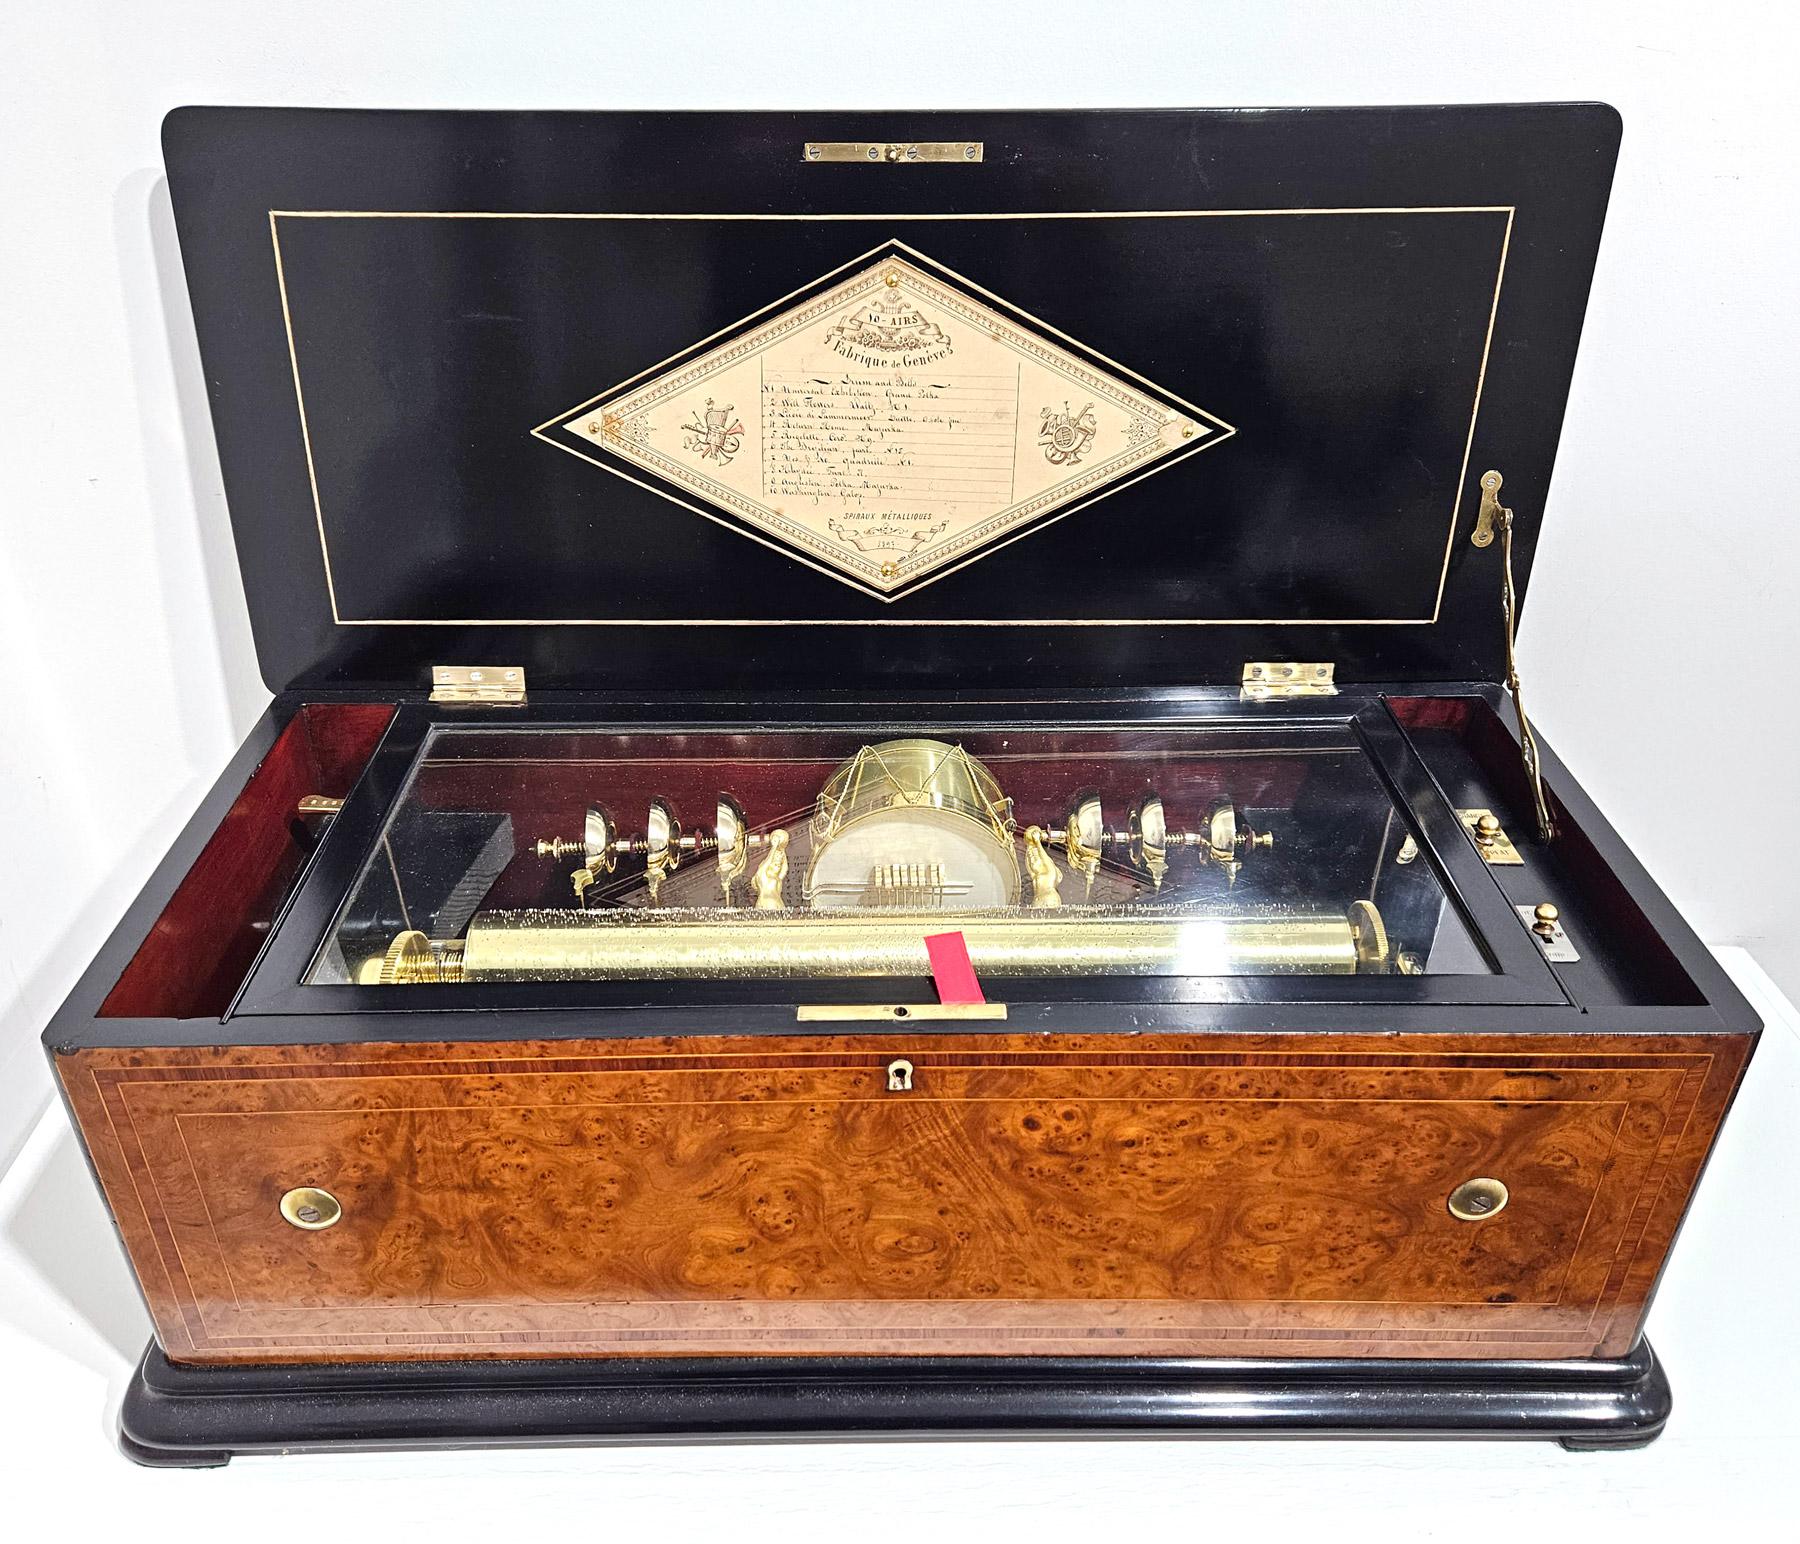 A magnificent quality six bell and drum cylinder music box made by Charles Lecoultre of Geneva, Switzerland in c. 1870.
The fully serviced musical movement features a central drum and six rack mounted saucer bells struck by axe head strikers and